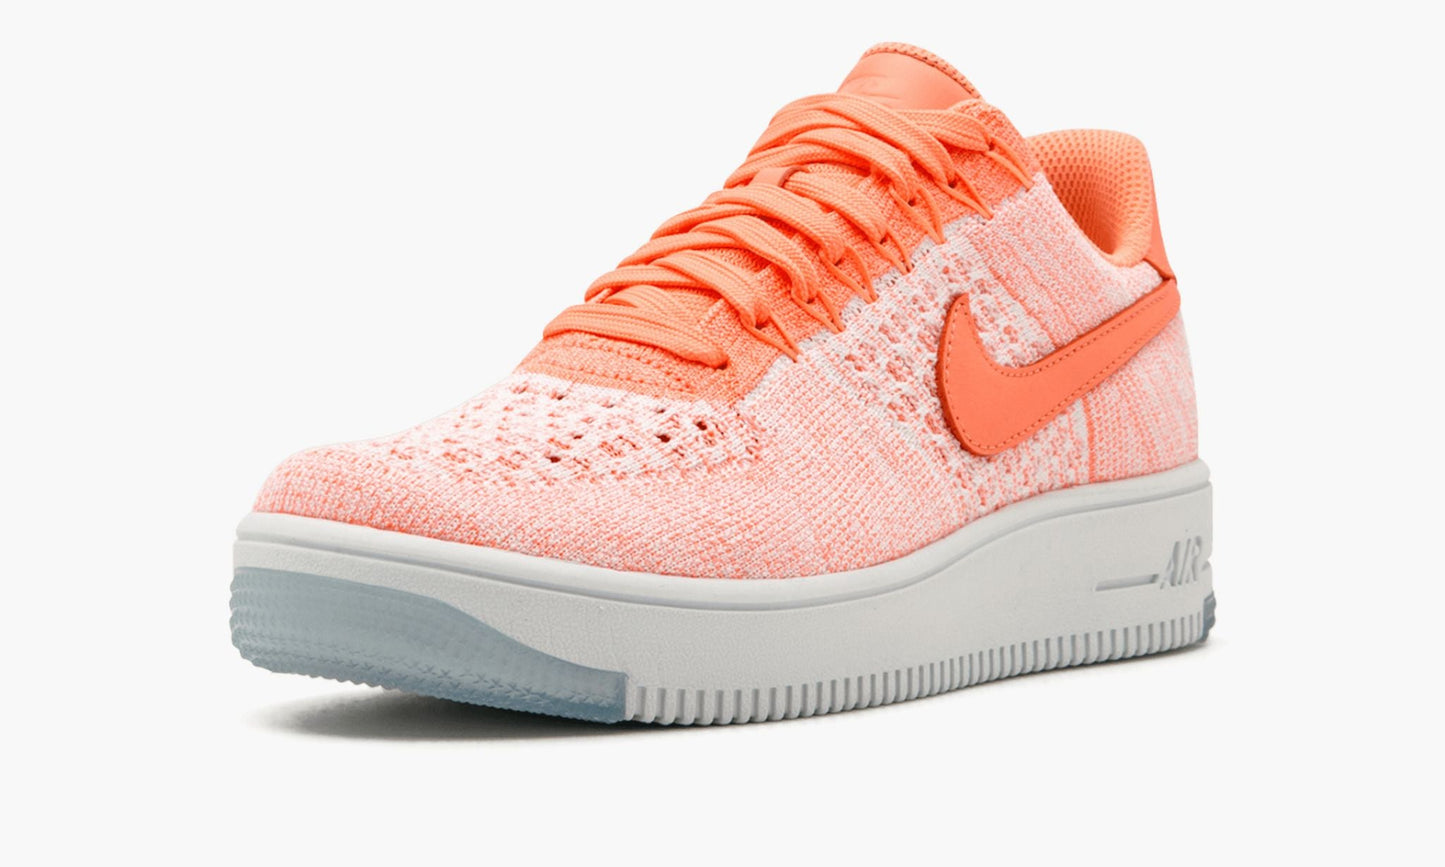 WMNS Air Force 1 Flyknit Low "Atomic Pink"